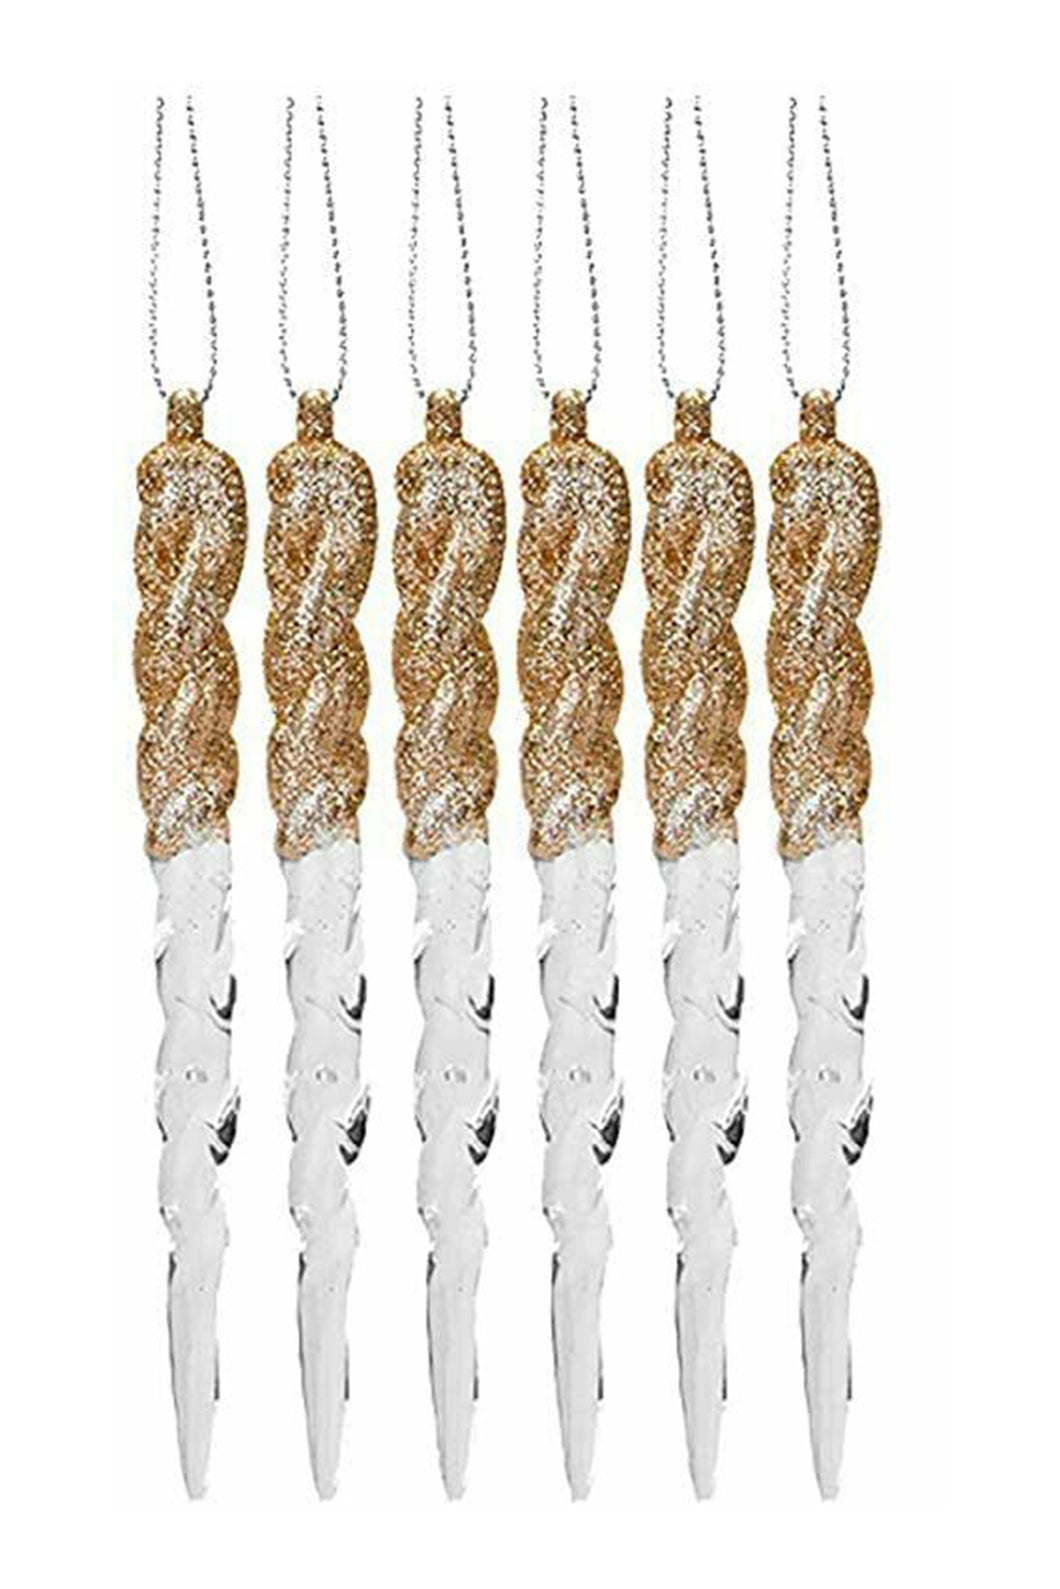 Glittery Icicle Decoration Set of 6 Hanging Clear Christmas Tree Décor in Rose Gold, Pale Gold, or Silver